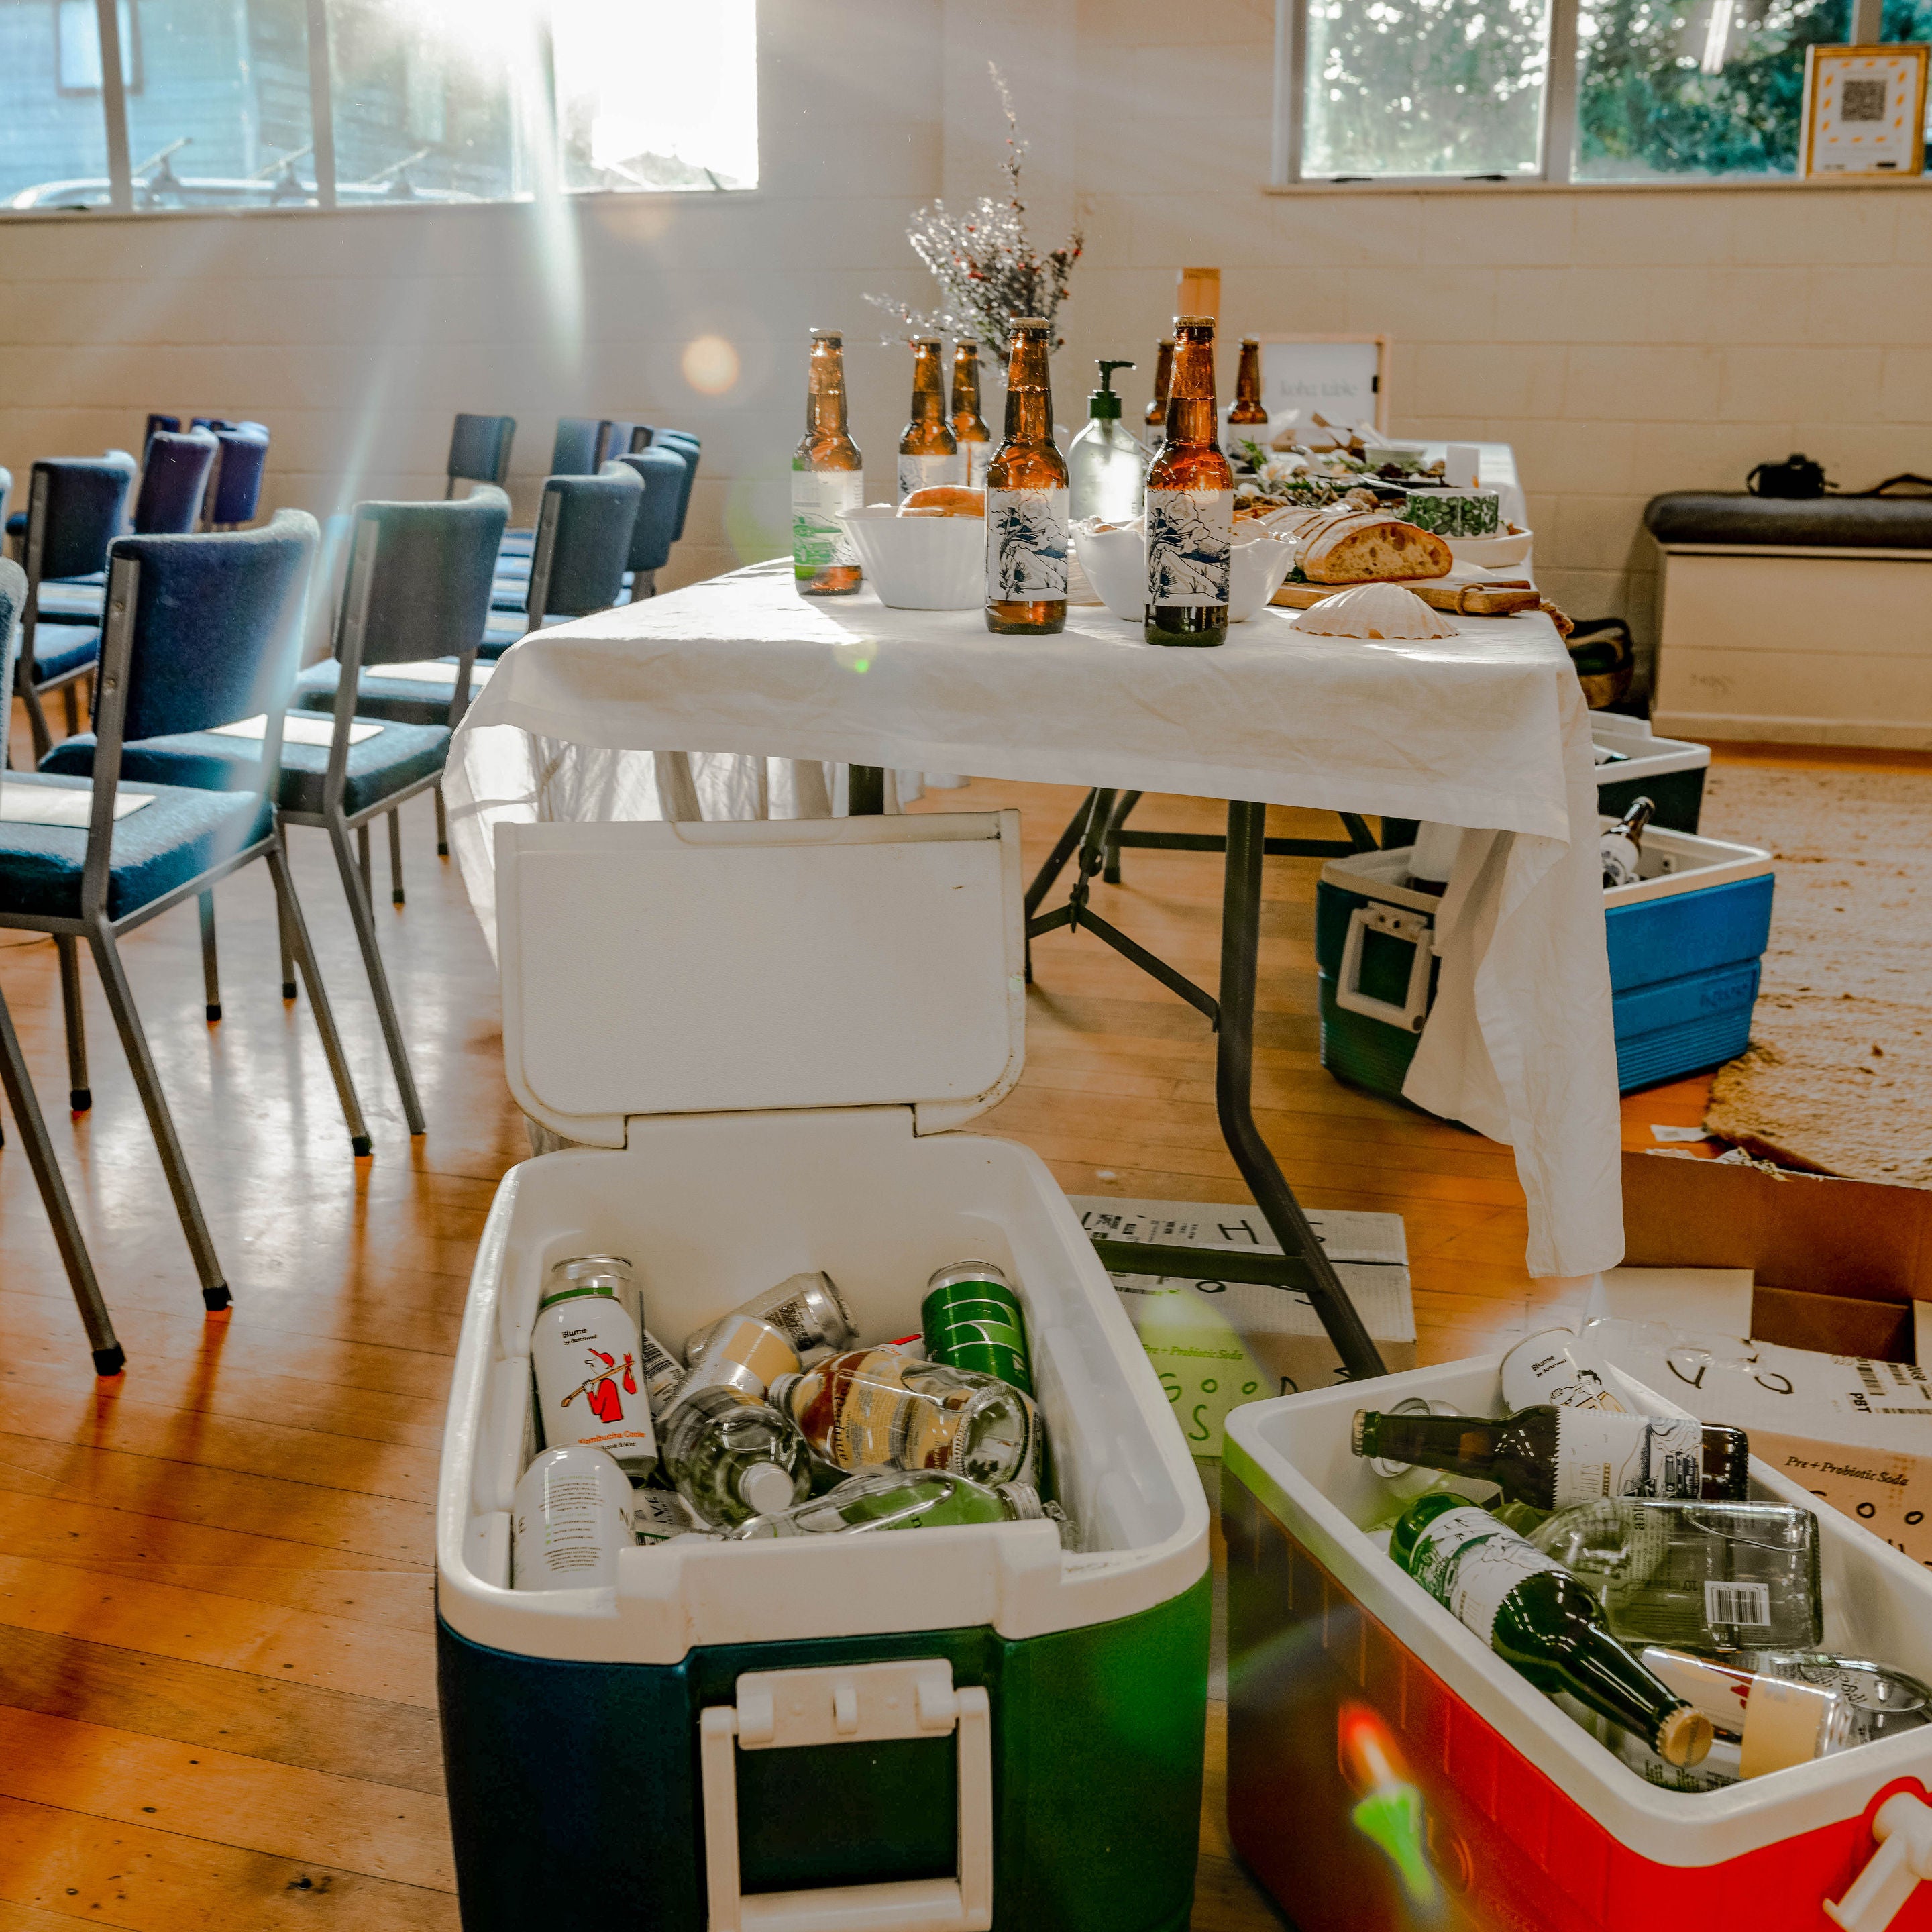 A Chilly Bin Full of Bevvies - The Recap